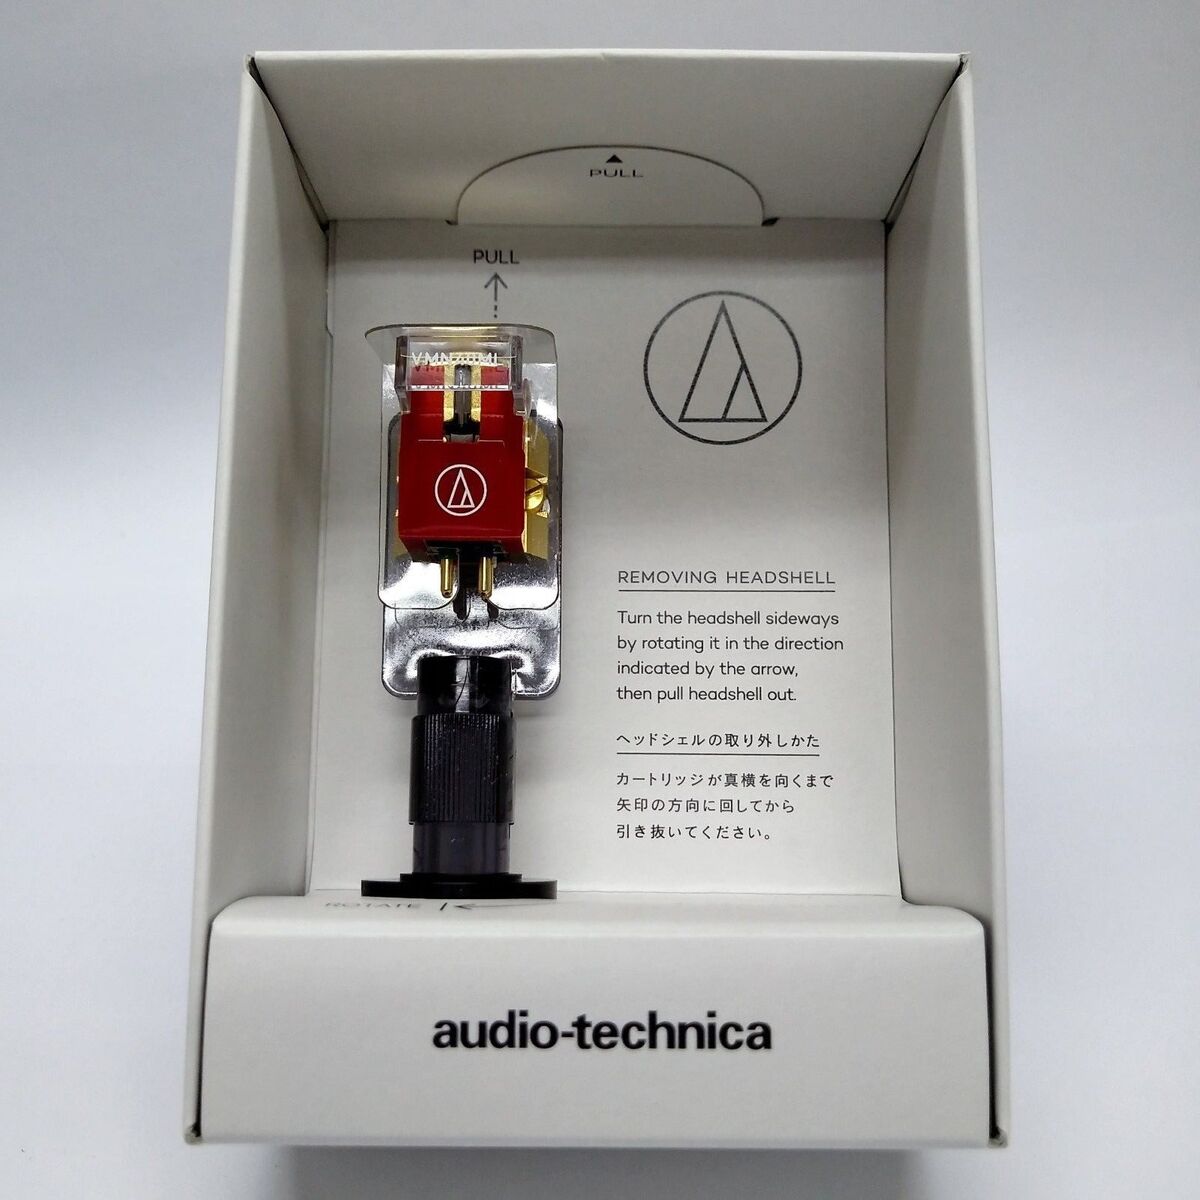 audio technica made in japan